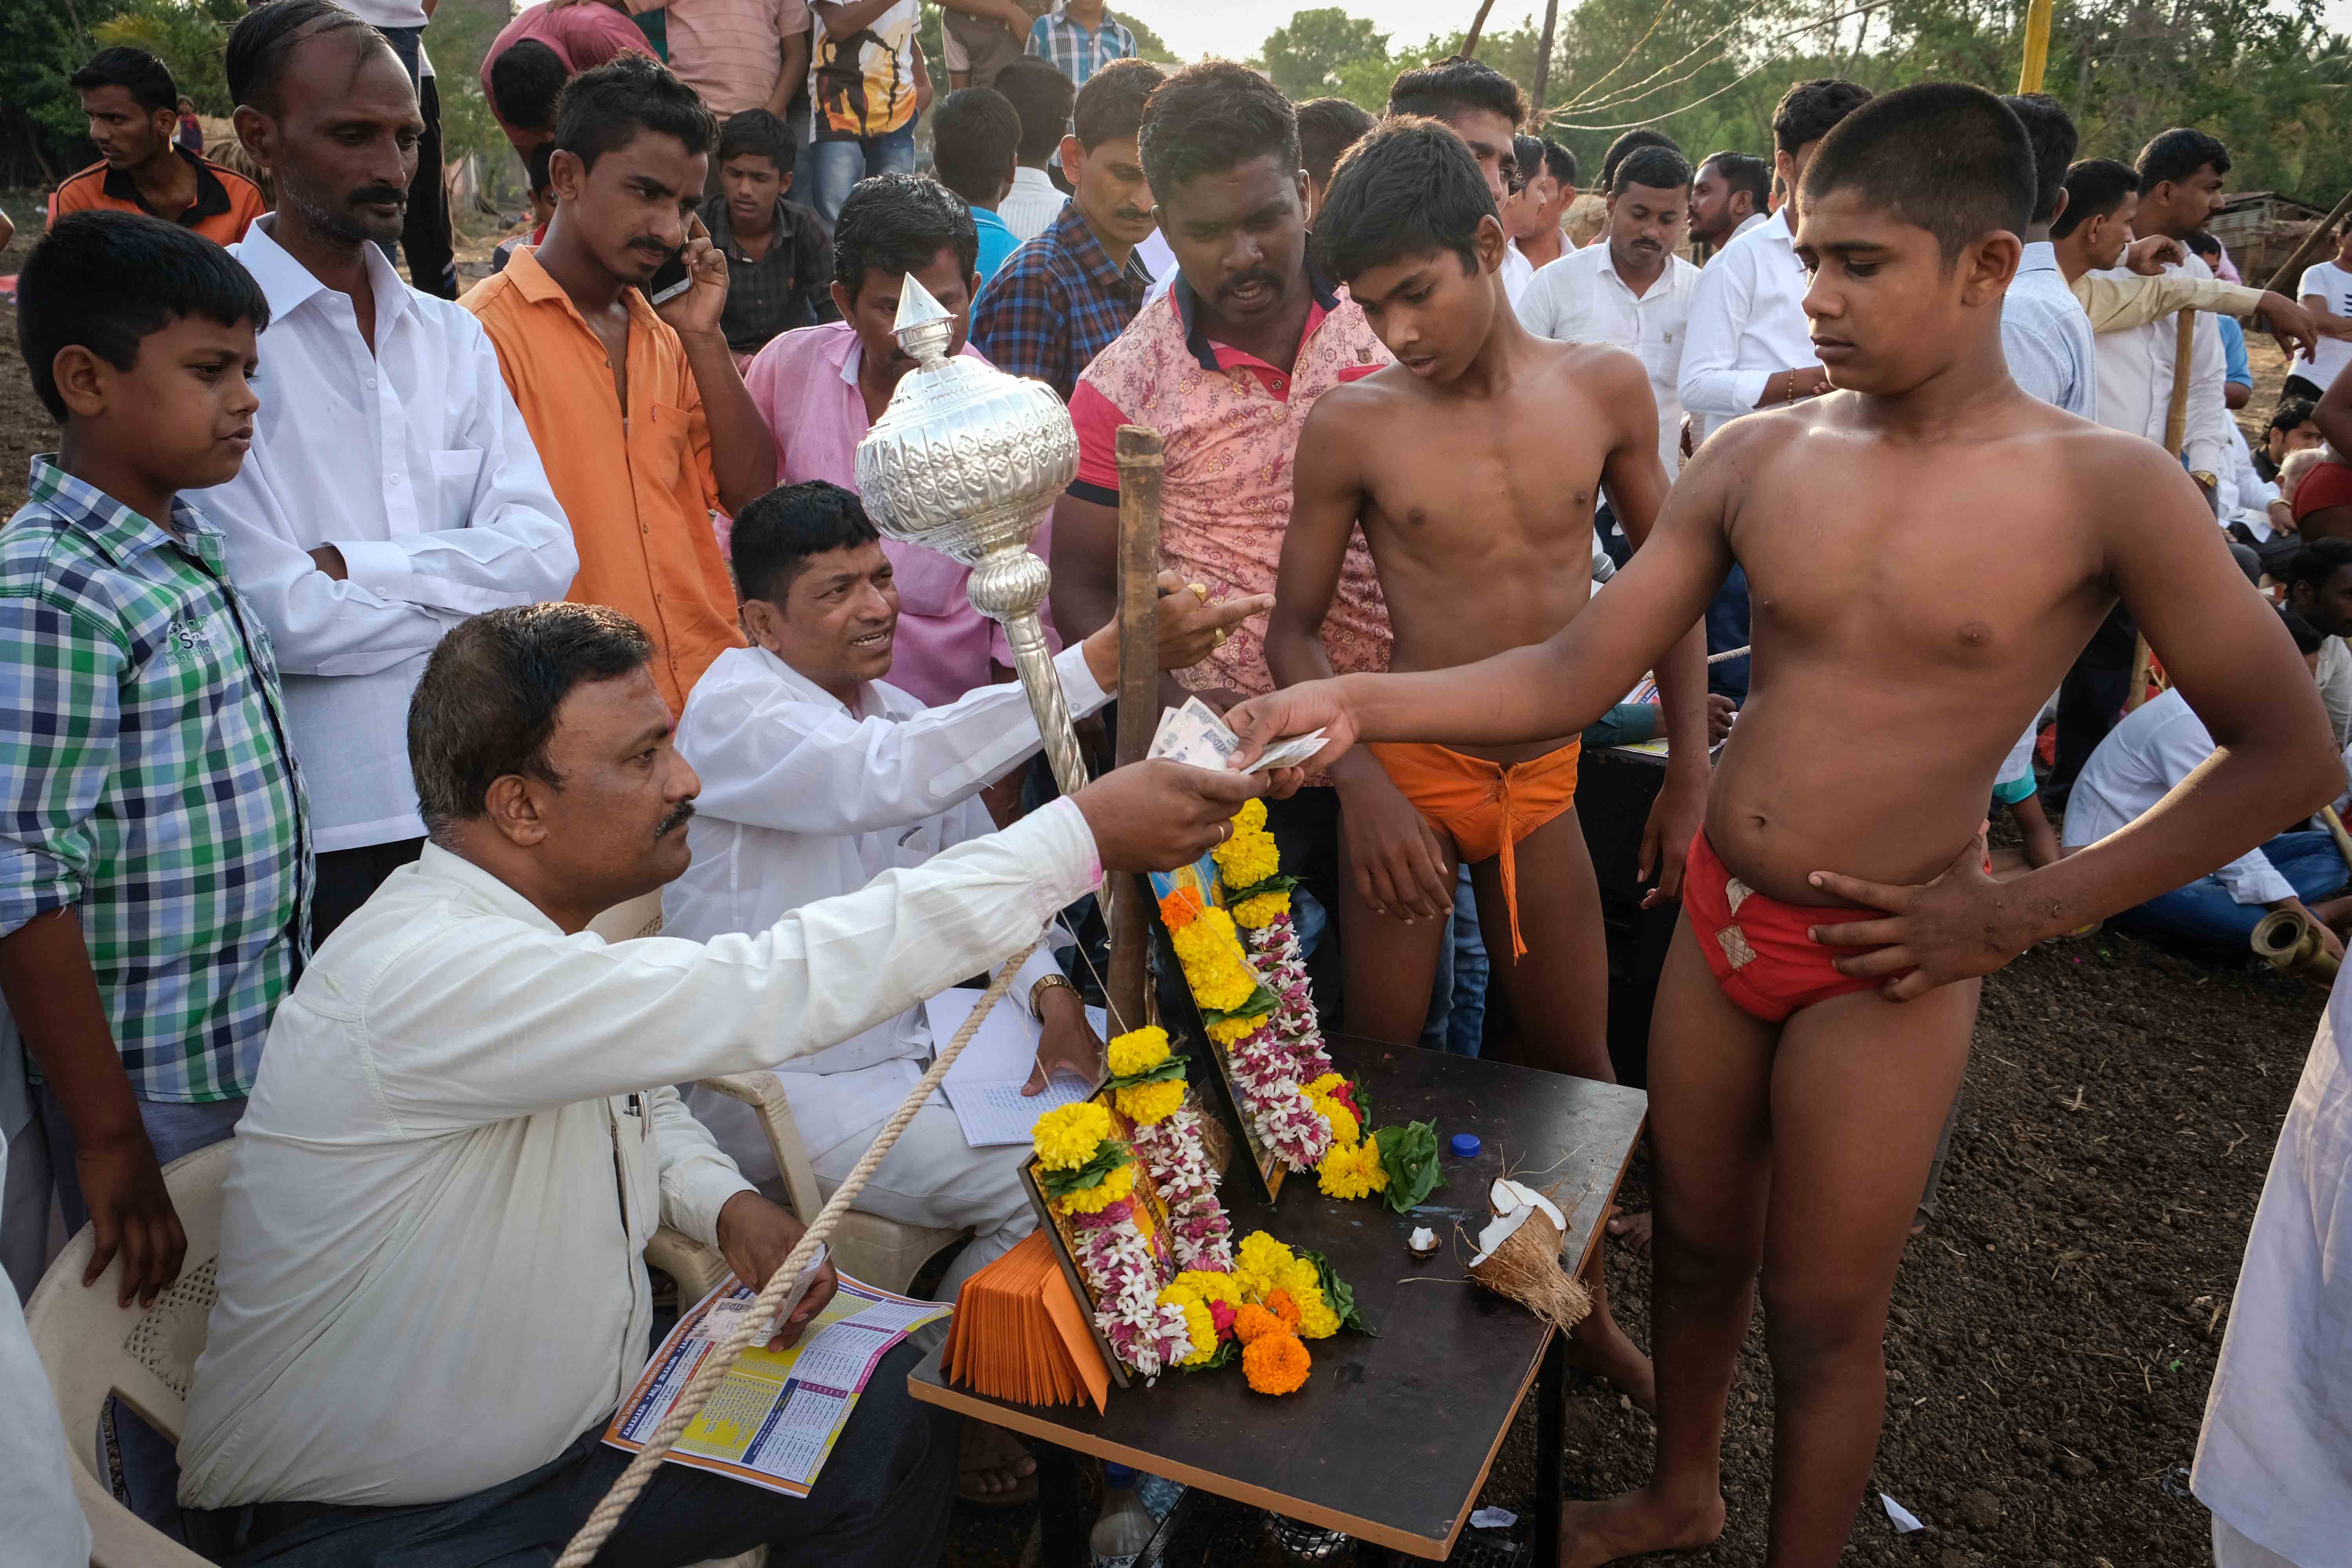 Wrestlers receiving their prize money at a local competition held in Savade village, Karad taluka of Satara district in Maharashtra. Prize amount can be anything between 150 rupees to 1 lakh rupees, depending on the different weight categories, age groups and the various finishing positions. Photograph by Indrajit Khambe ©Sahapedia 